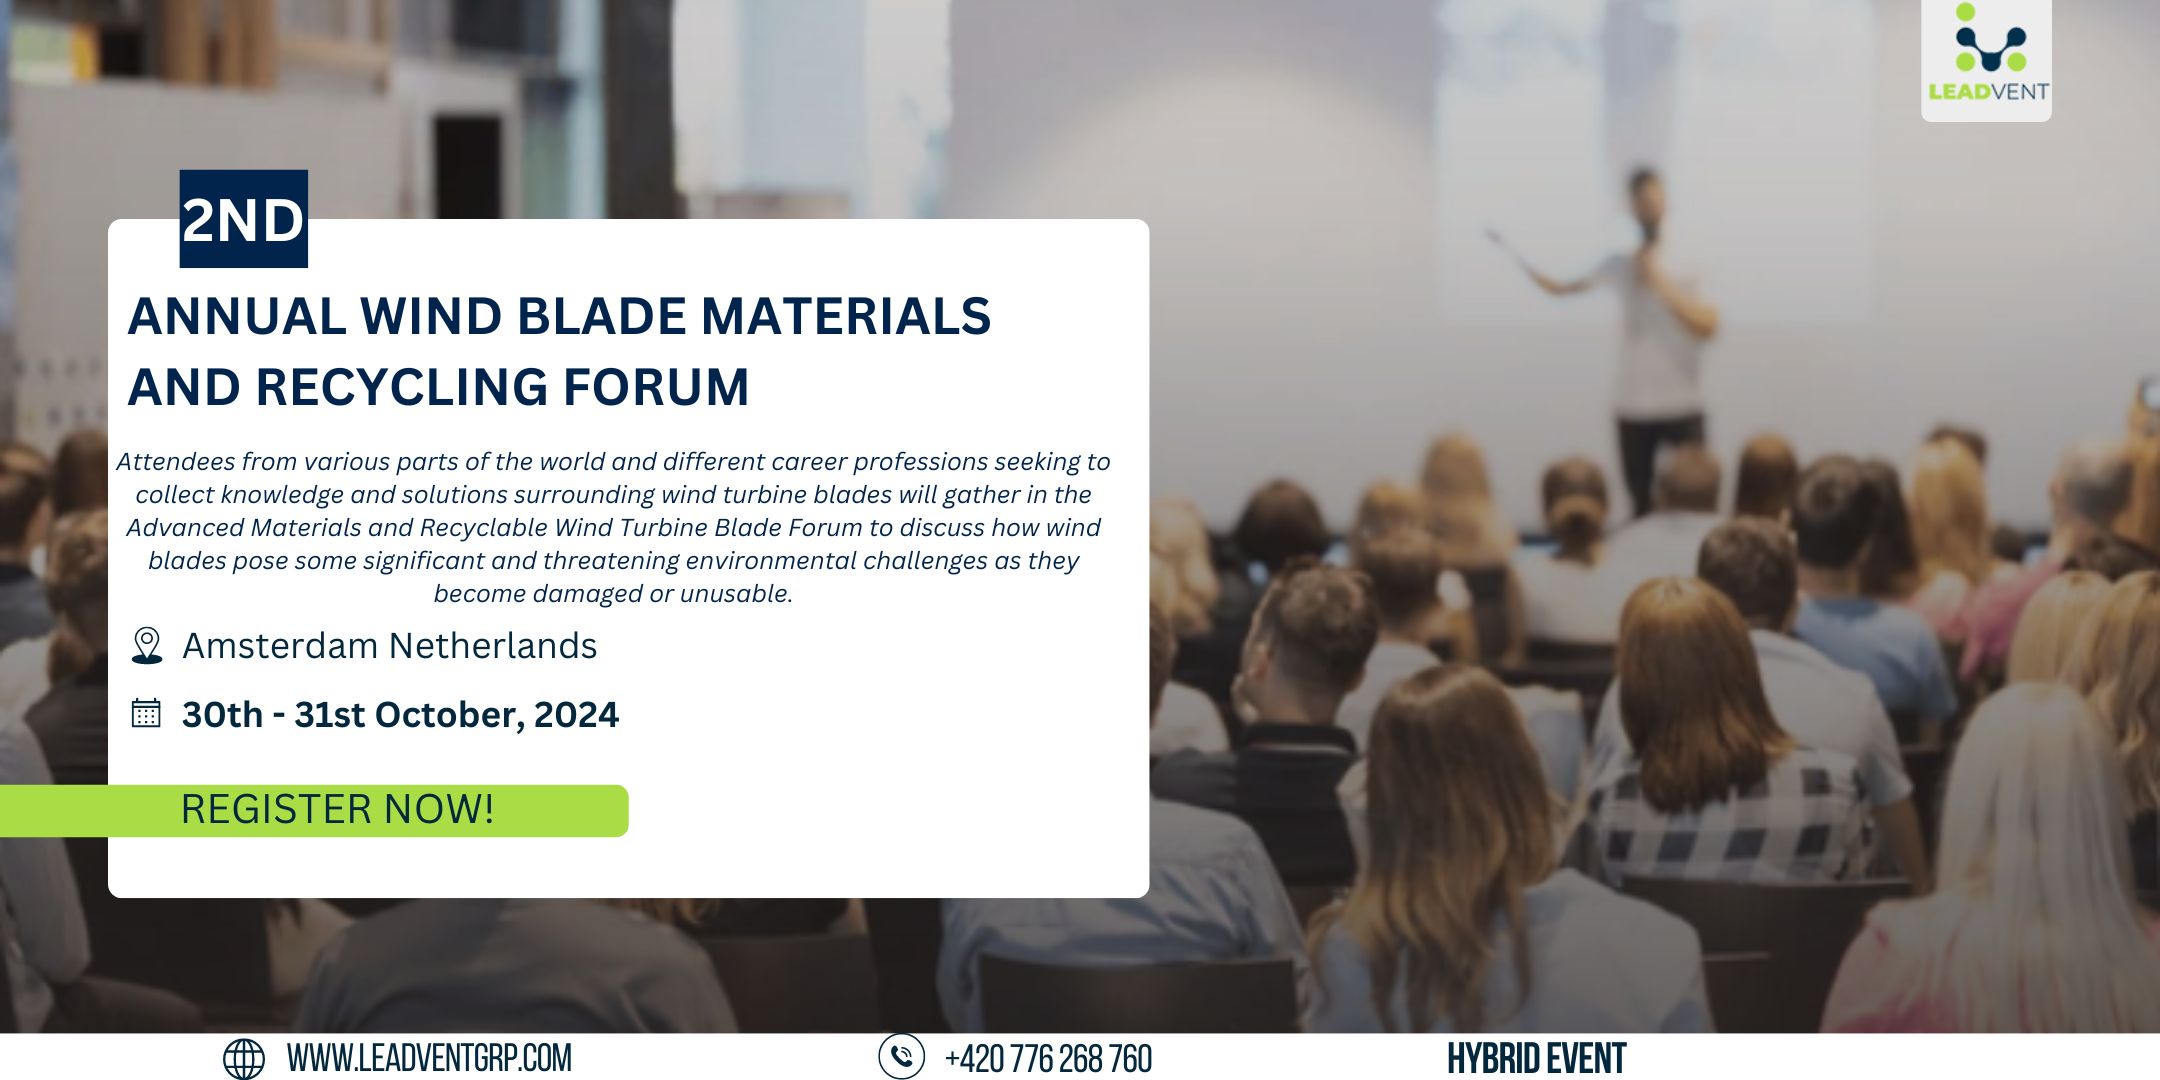 2nd Annual Wind Blade Materials And Recycling Forum organized by Leadvent Group